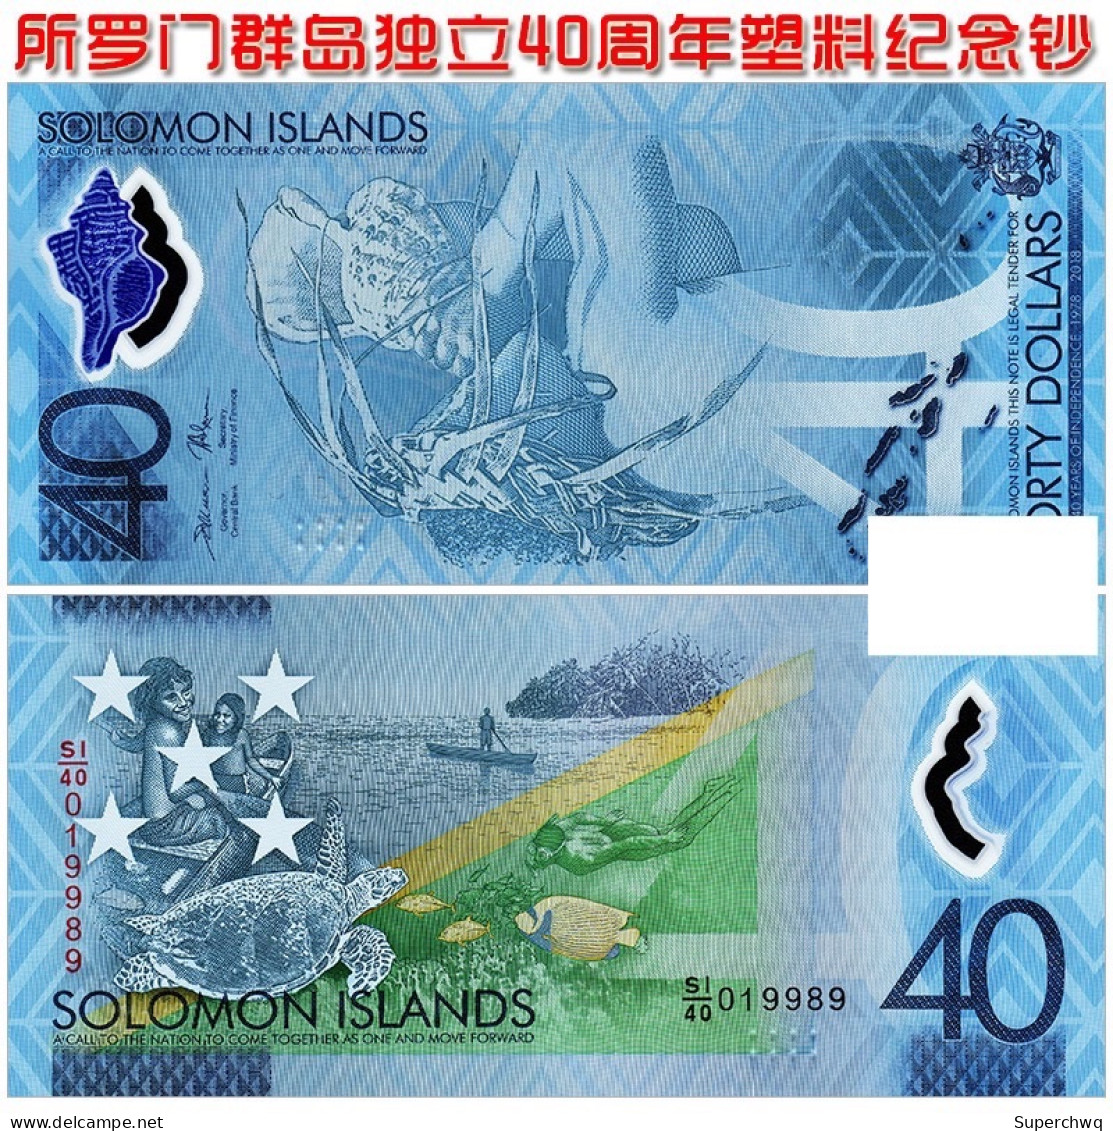 Oceania Solomon Islands 40 Yuan 2018 Independence 40th Anniversary Plastic Commemorative Note， Approximately 145 X67mm I - Solomon Islands